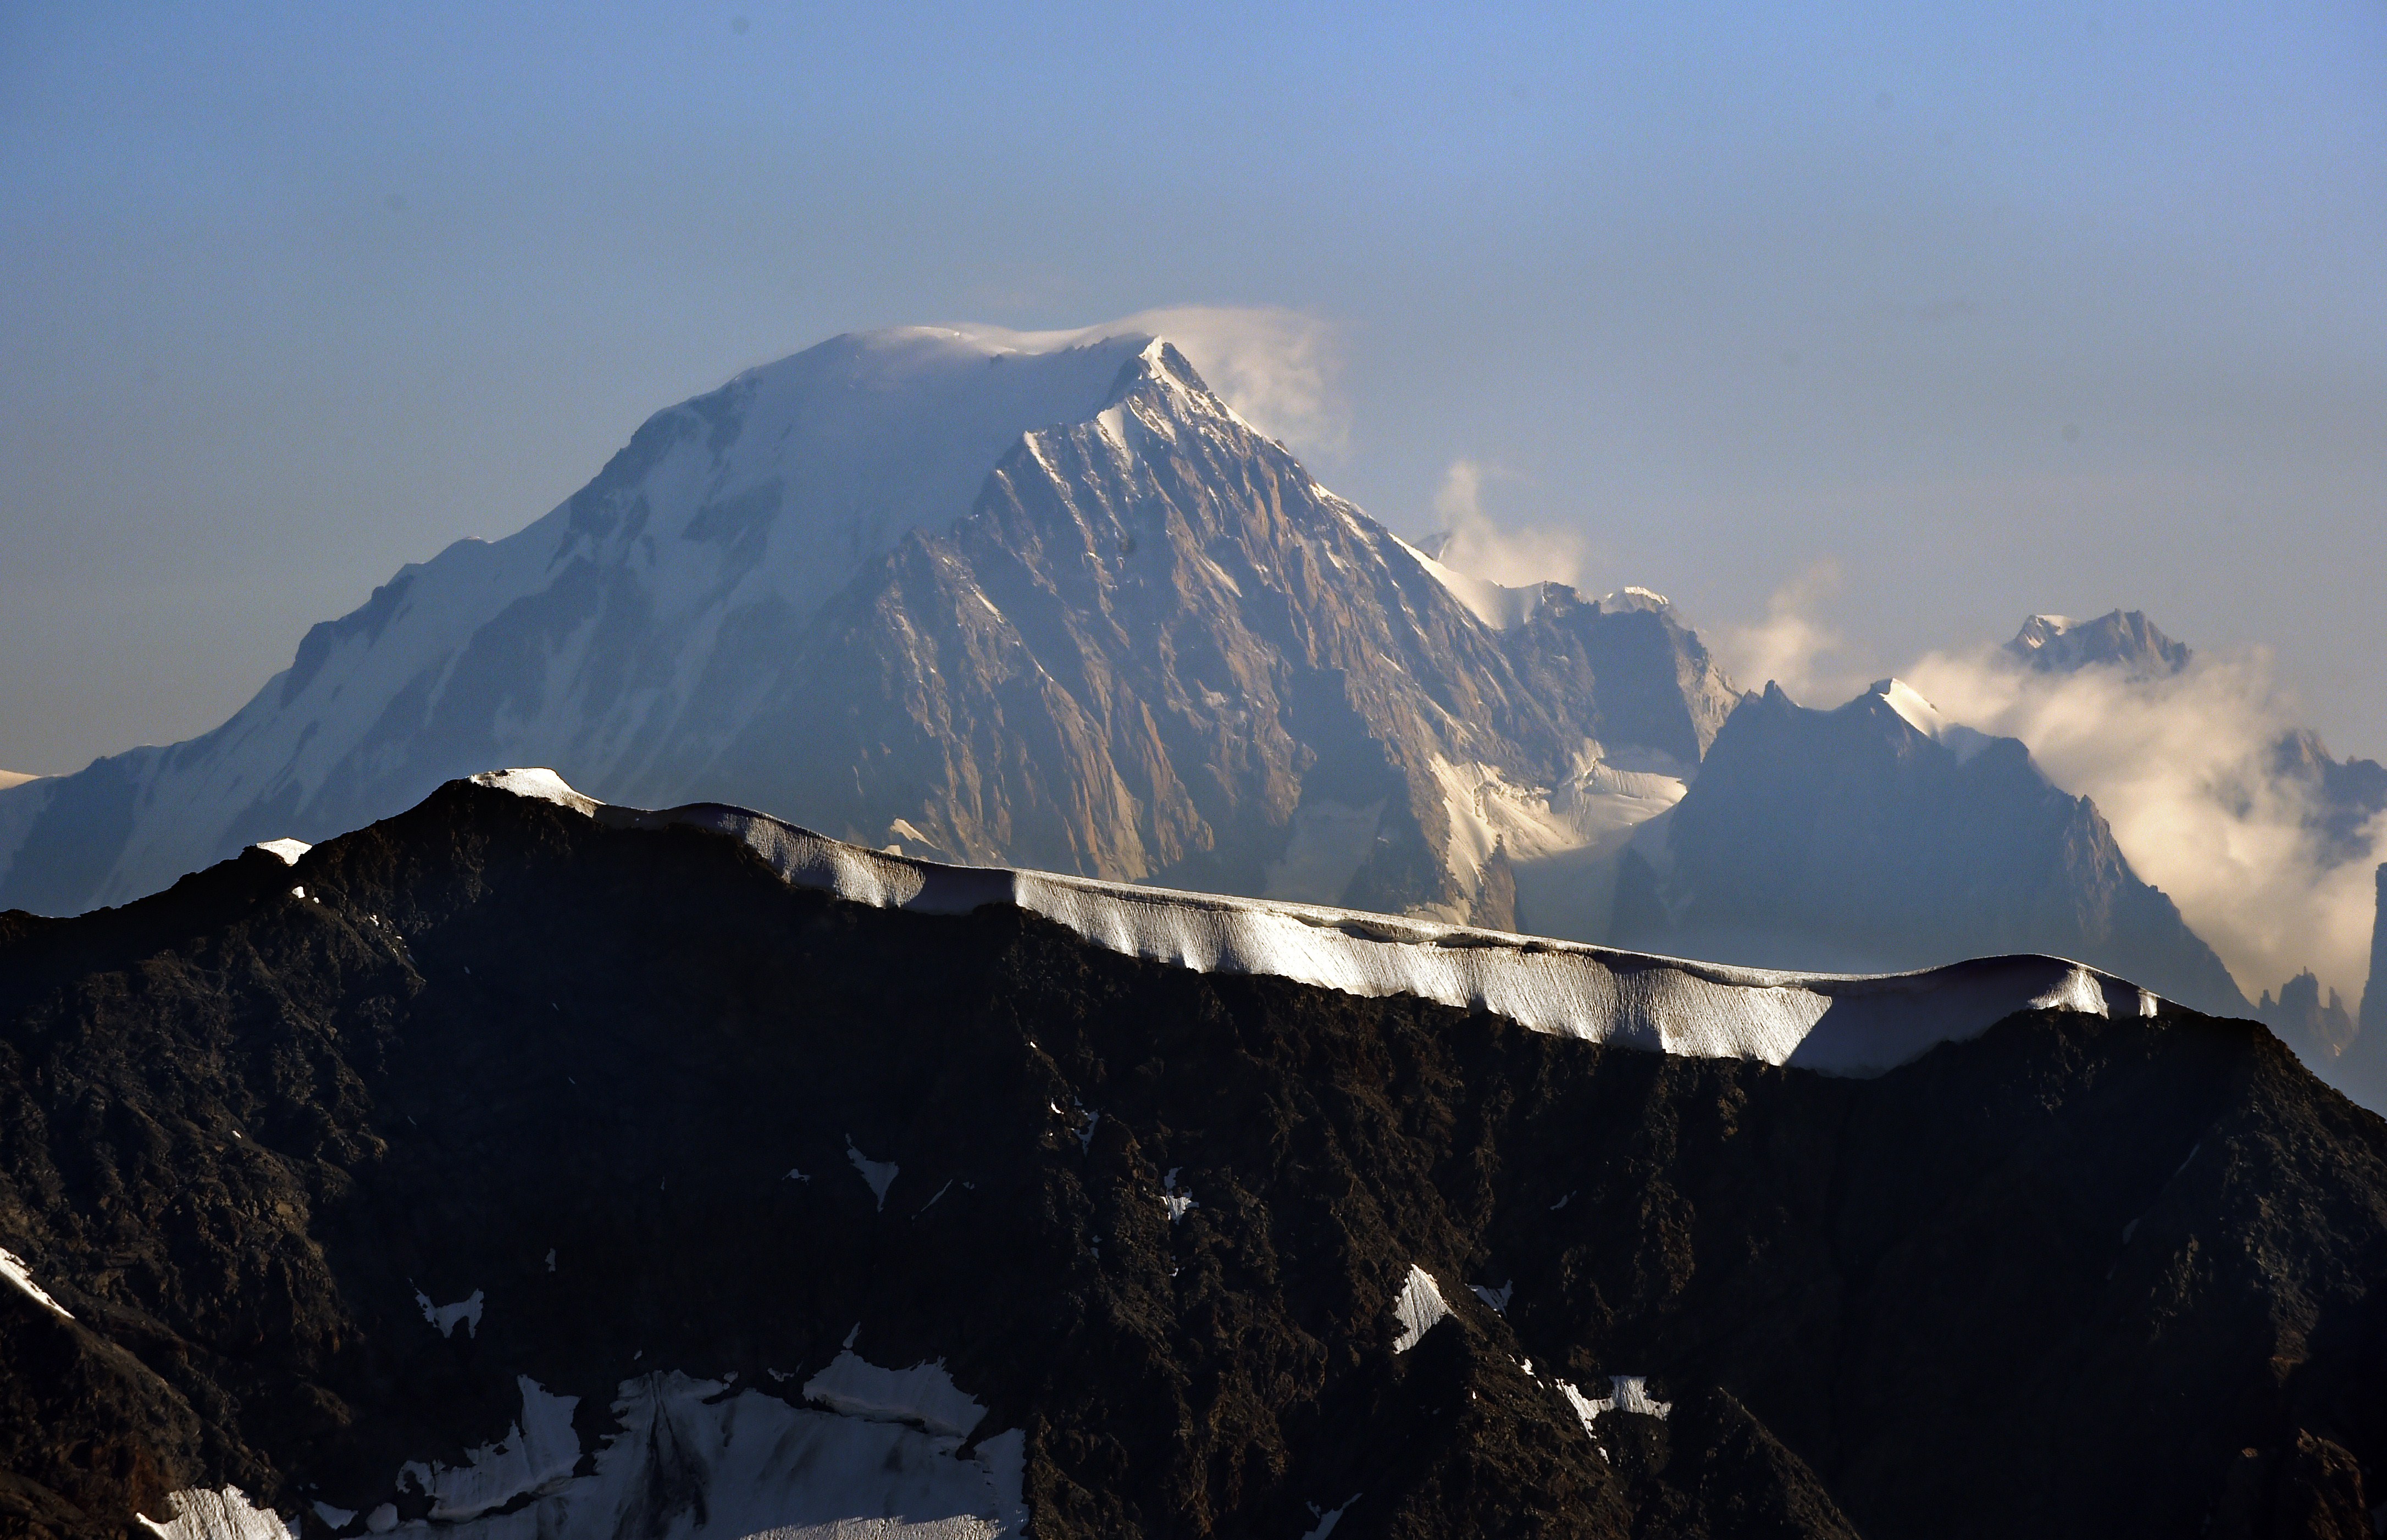 The northern side of Mont Blanc, the highest mountain in the Alps. (Loic Venance—AFP/Getty)